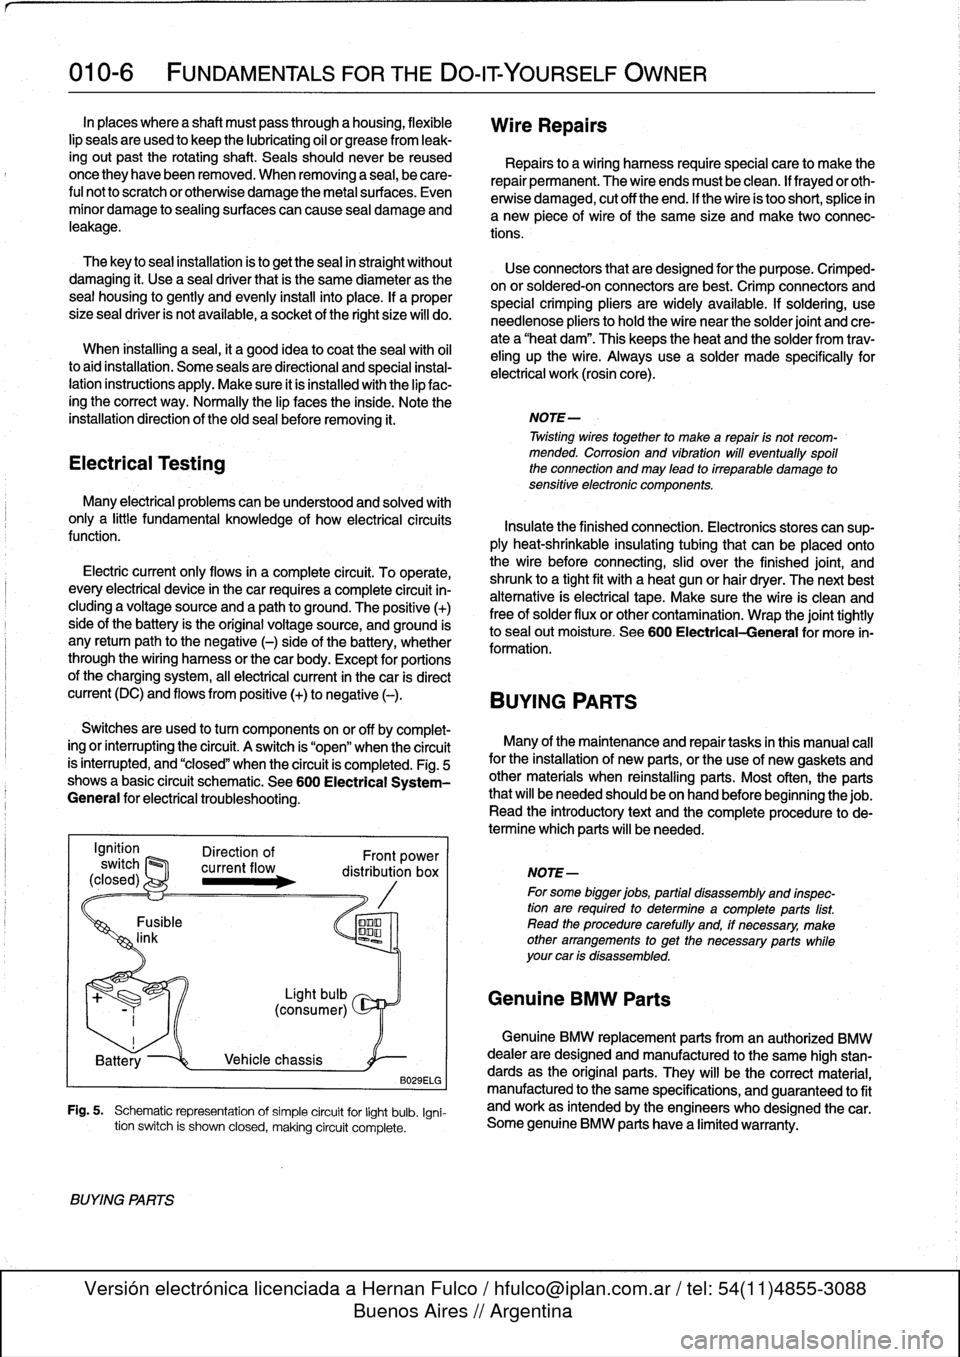 BMW 325i 1993 E36 Workshop Manual 
010-
6

	

FUNDAMENTALS
FOR
THE
DO-ITYOURSELF
OWNER

In
places
where
a
shaft
mustpass
through
a
housing,
flexible
lip
seals
areused
to
keep
the
lubricating
oil
or
grease
from
leak-

ingout
past
the
r